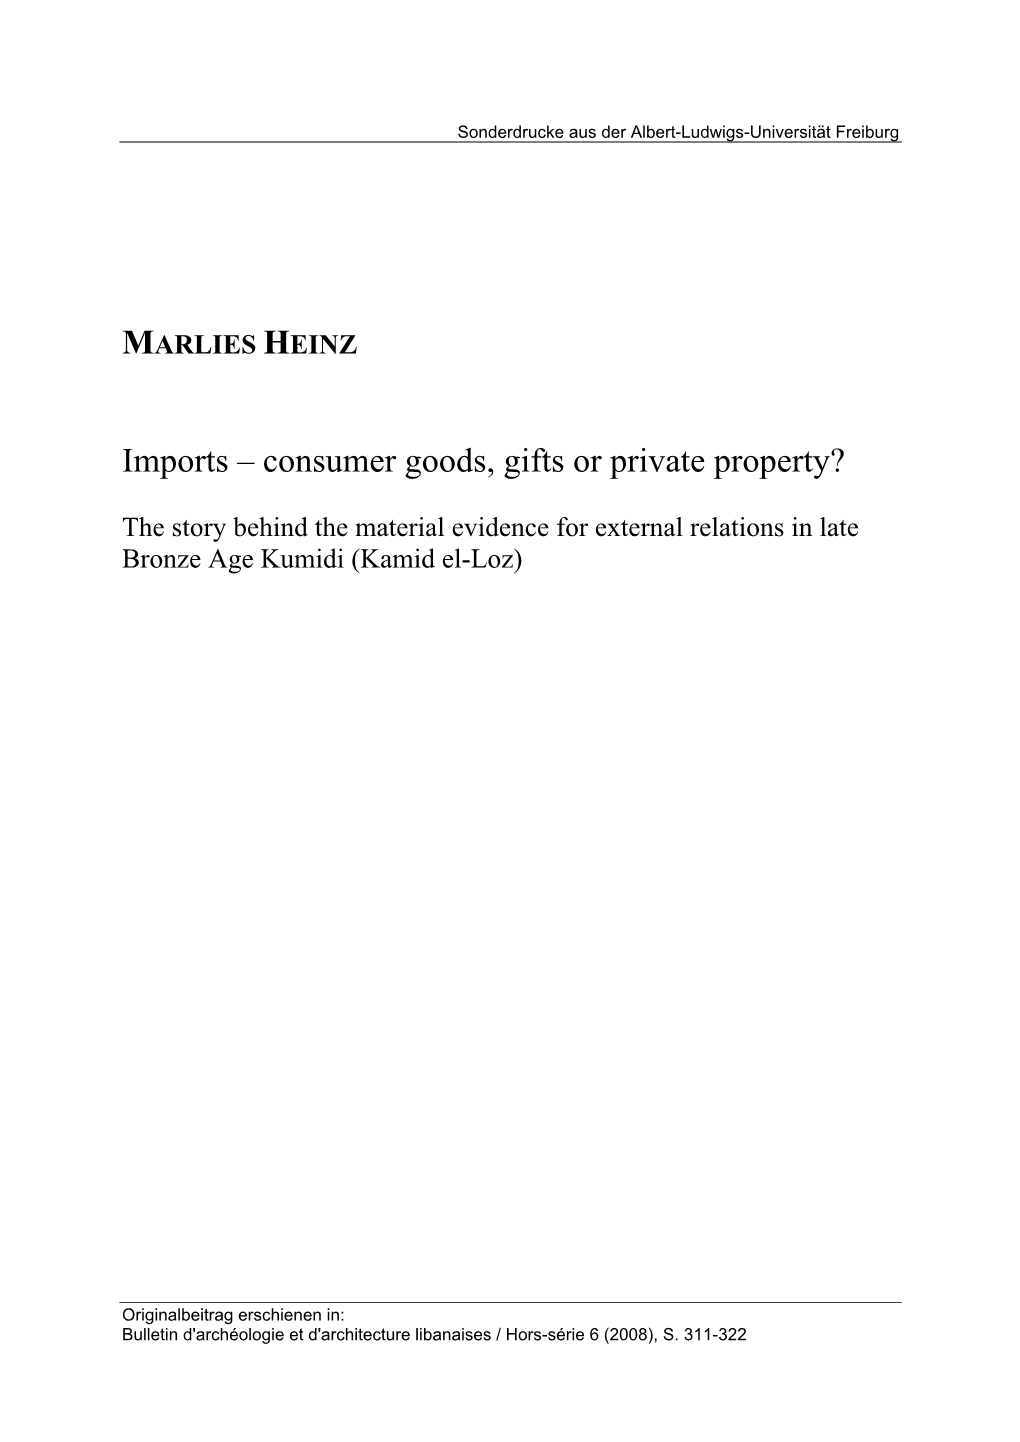 Imports – Consumer Goods, Gifts Or Private Property?